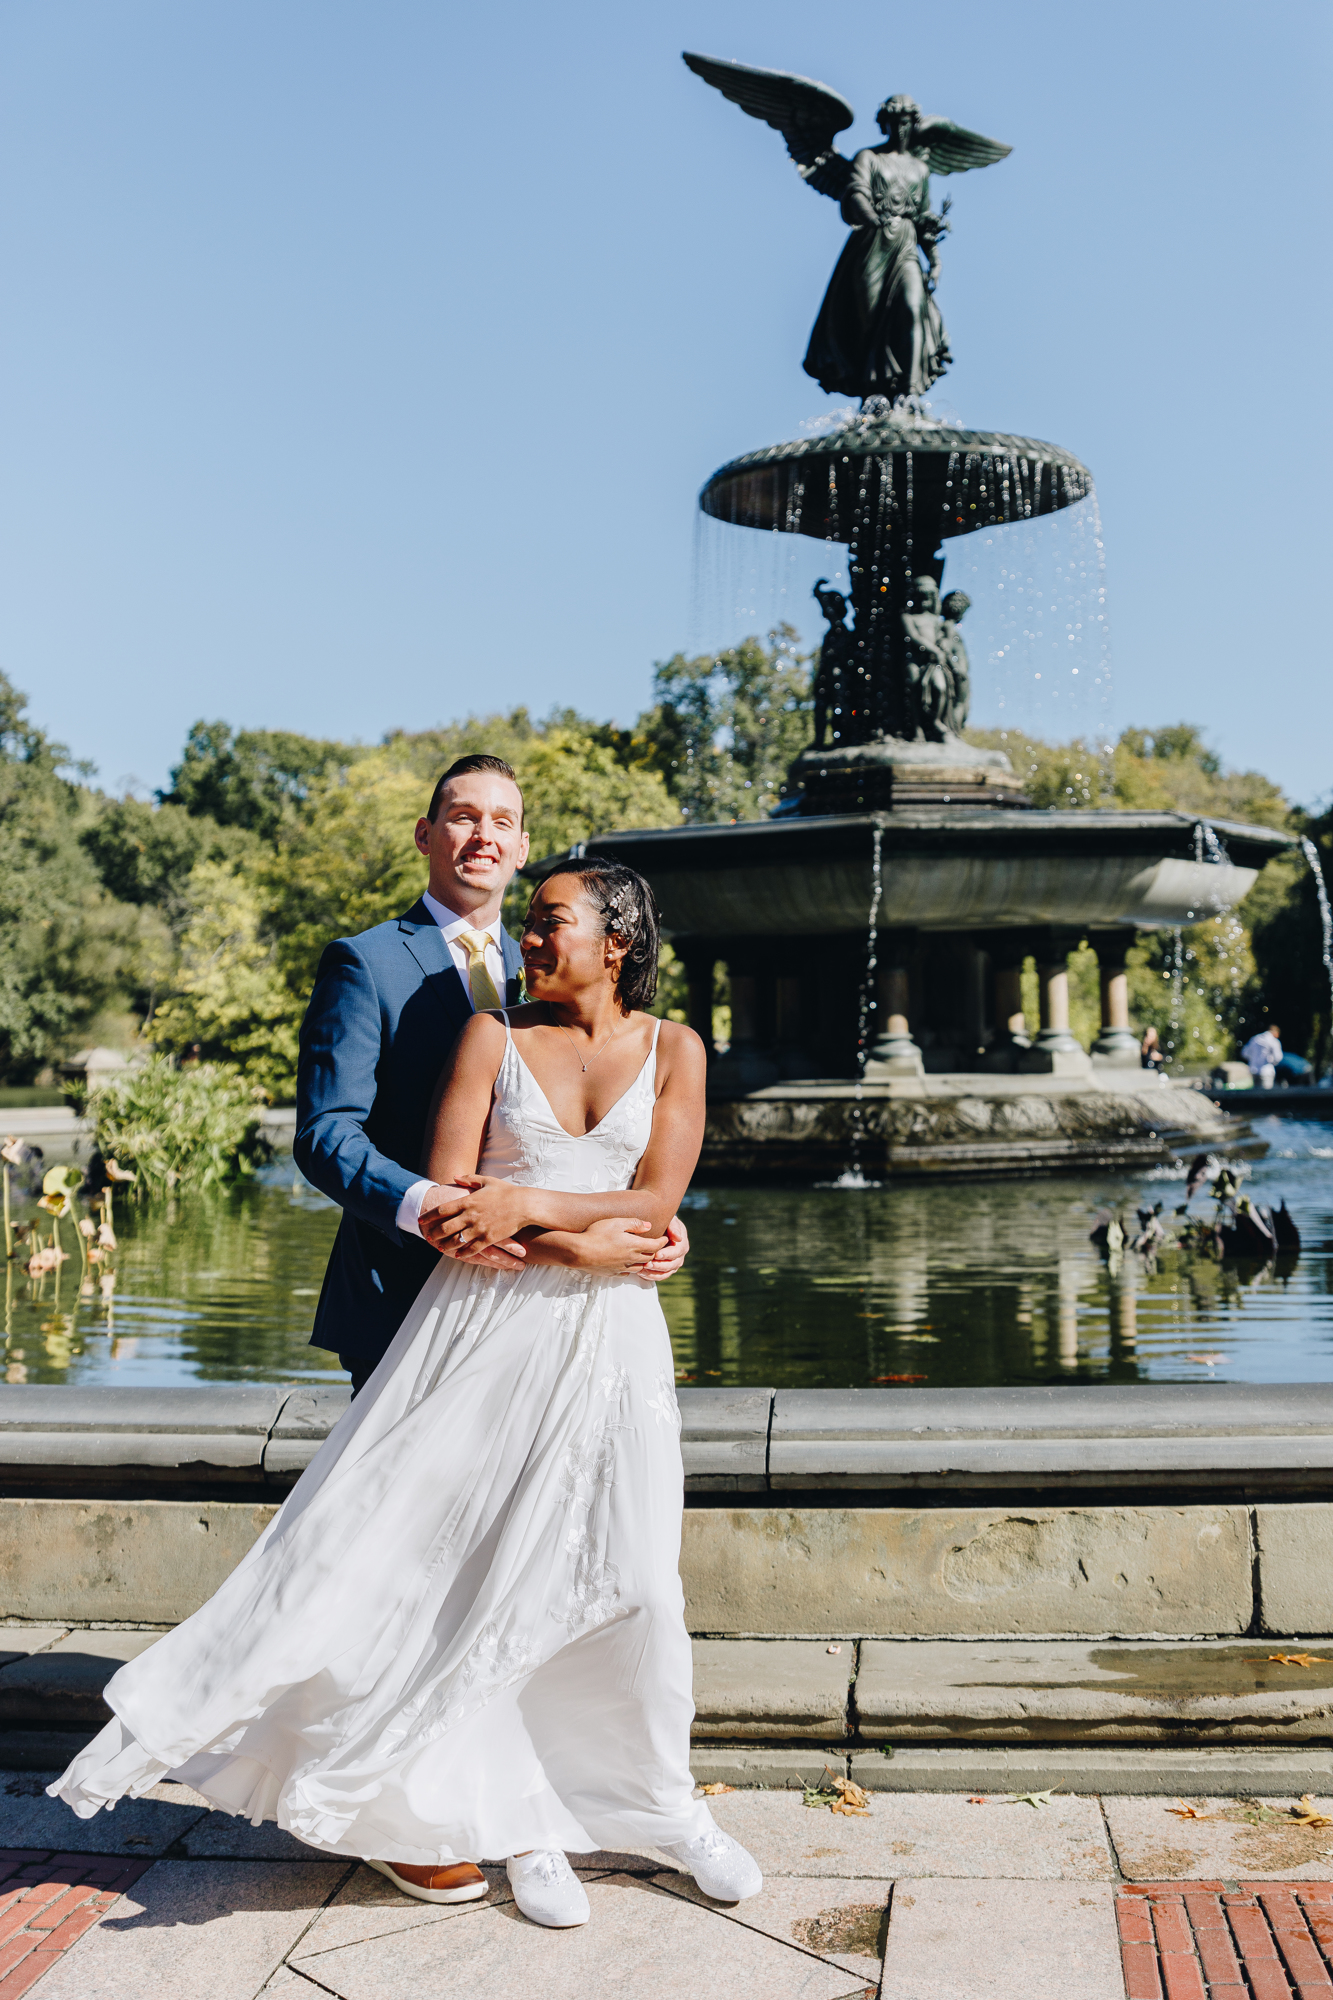 Fun Central Park Elopement Photos in NYC